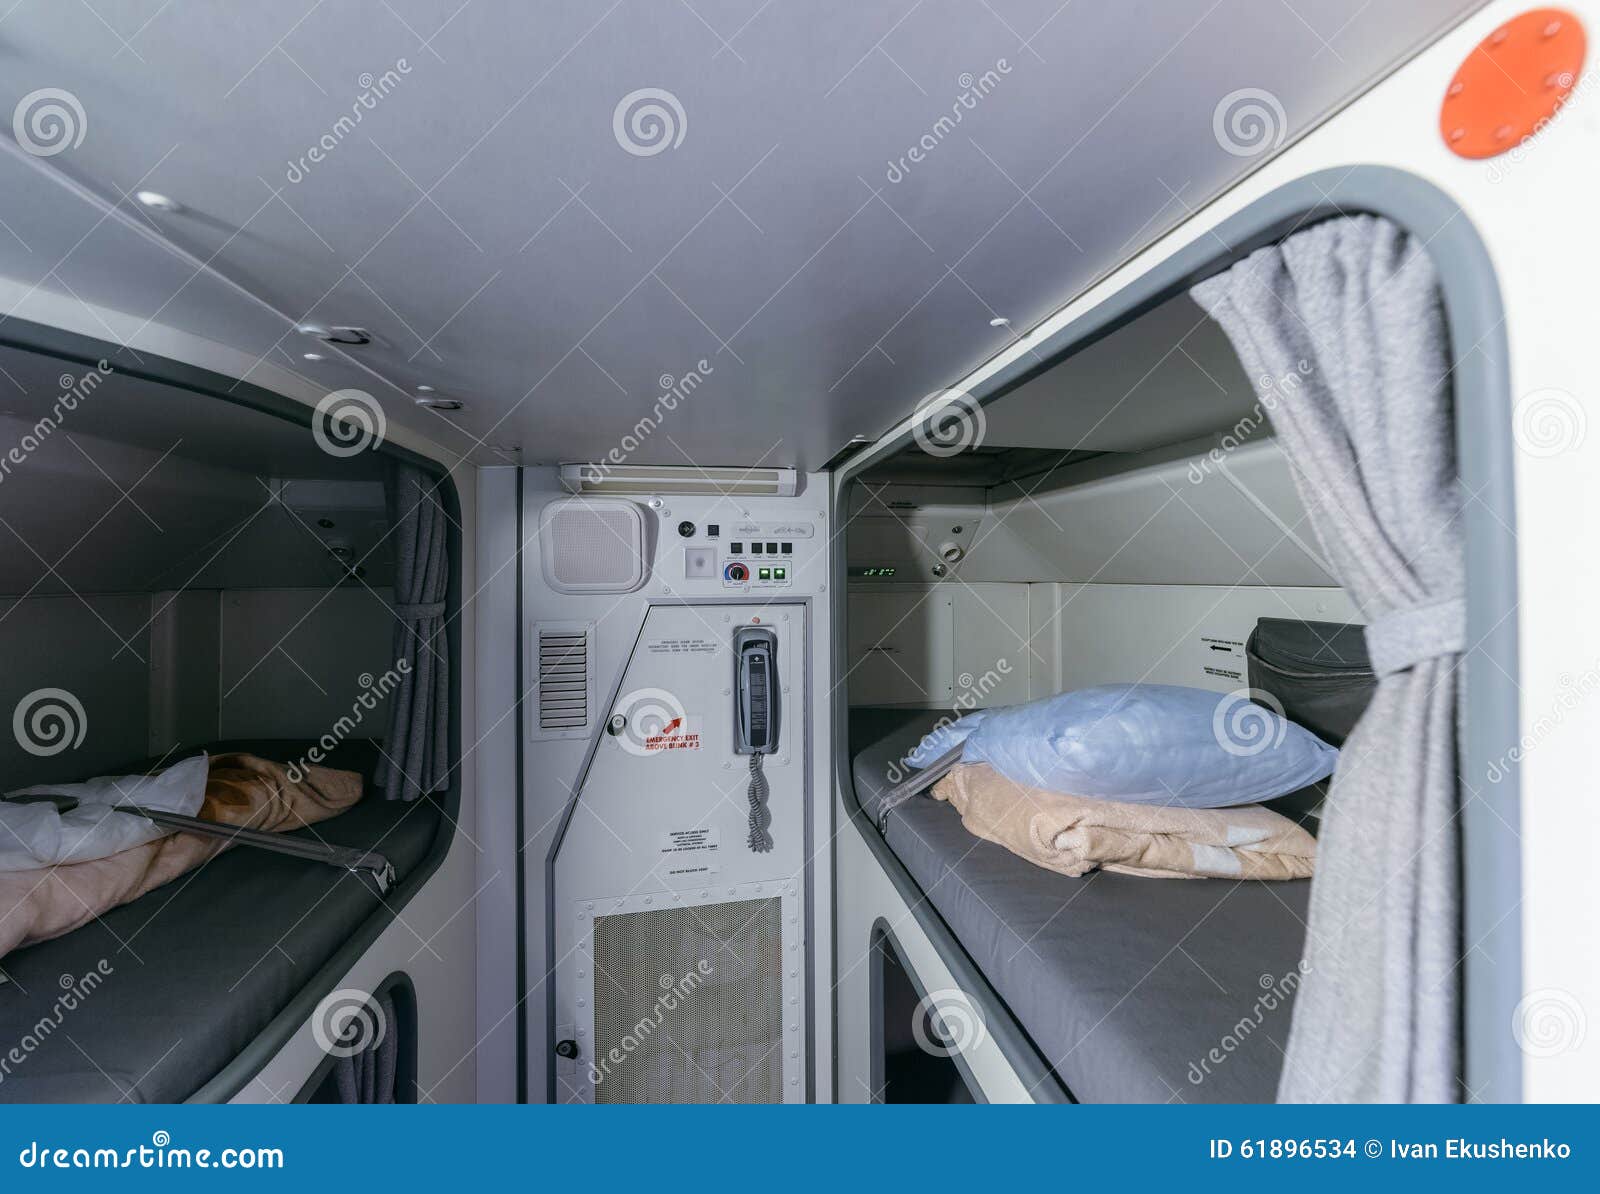 Boeing 767 At The Airport Stock Photo Image Of Floor